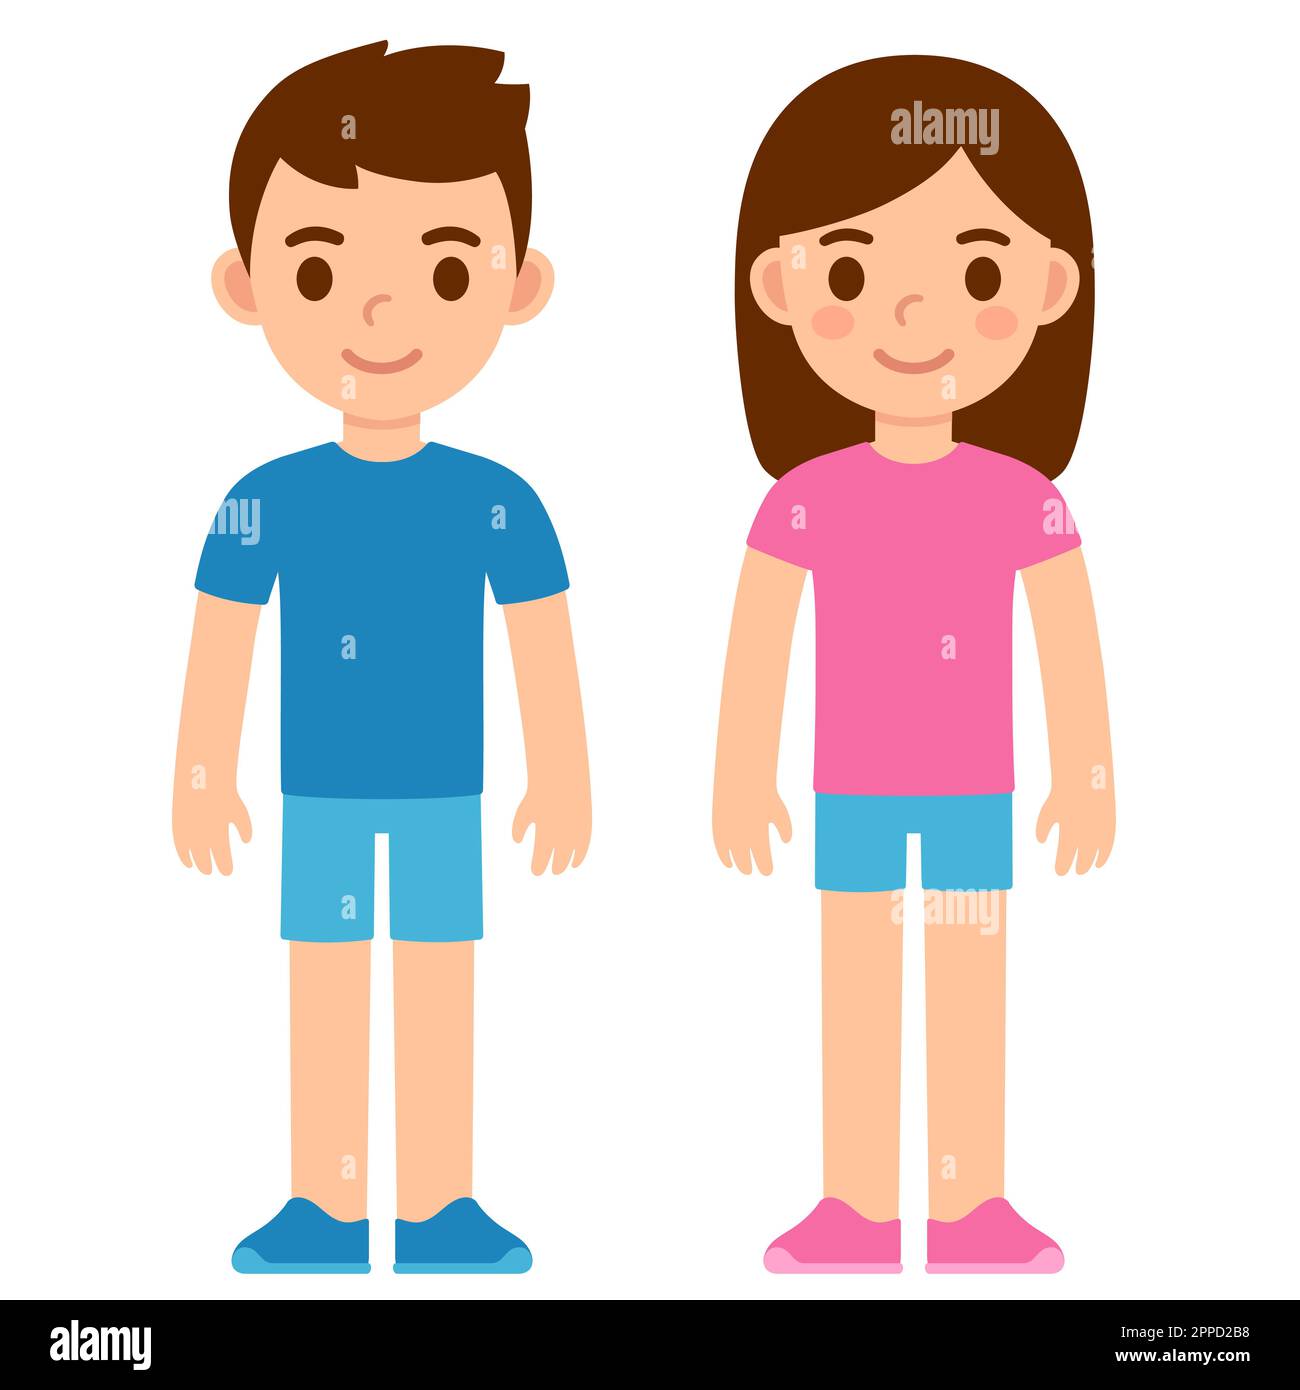 Cute cartoon boy in blue shirt and girl in pink shirt. Children in traditional gender clothes color. Simple flat vector illustration. Stock Vector